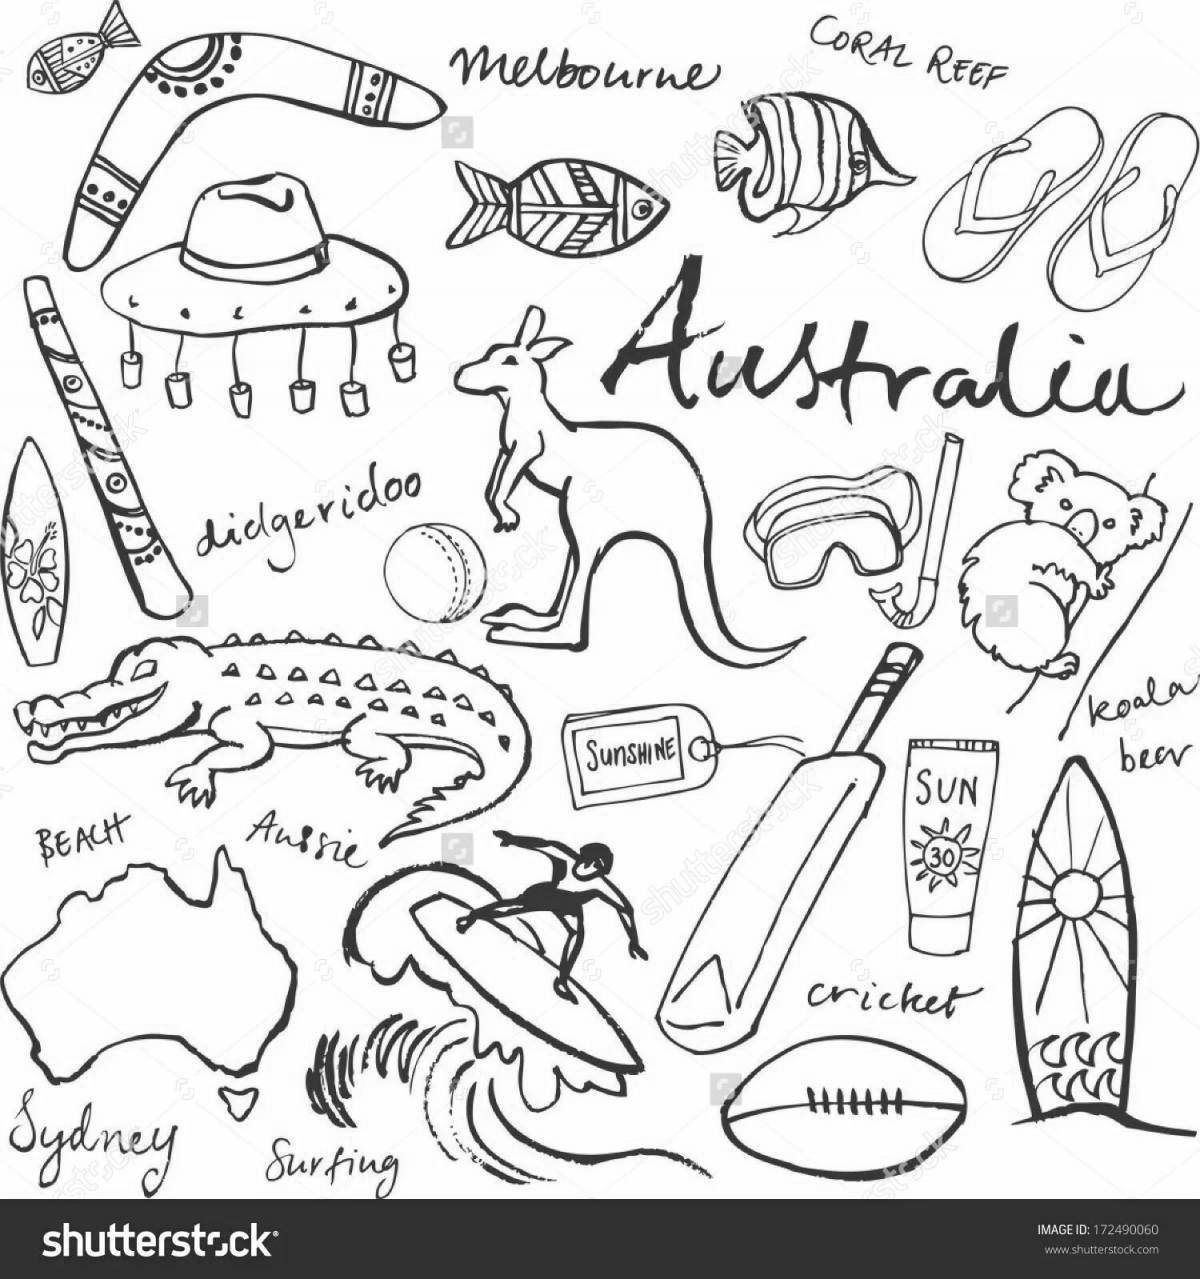 Australia's dazzling coat of arms coloring page